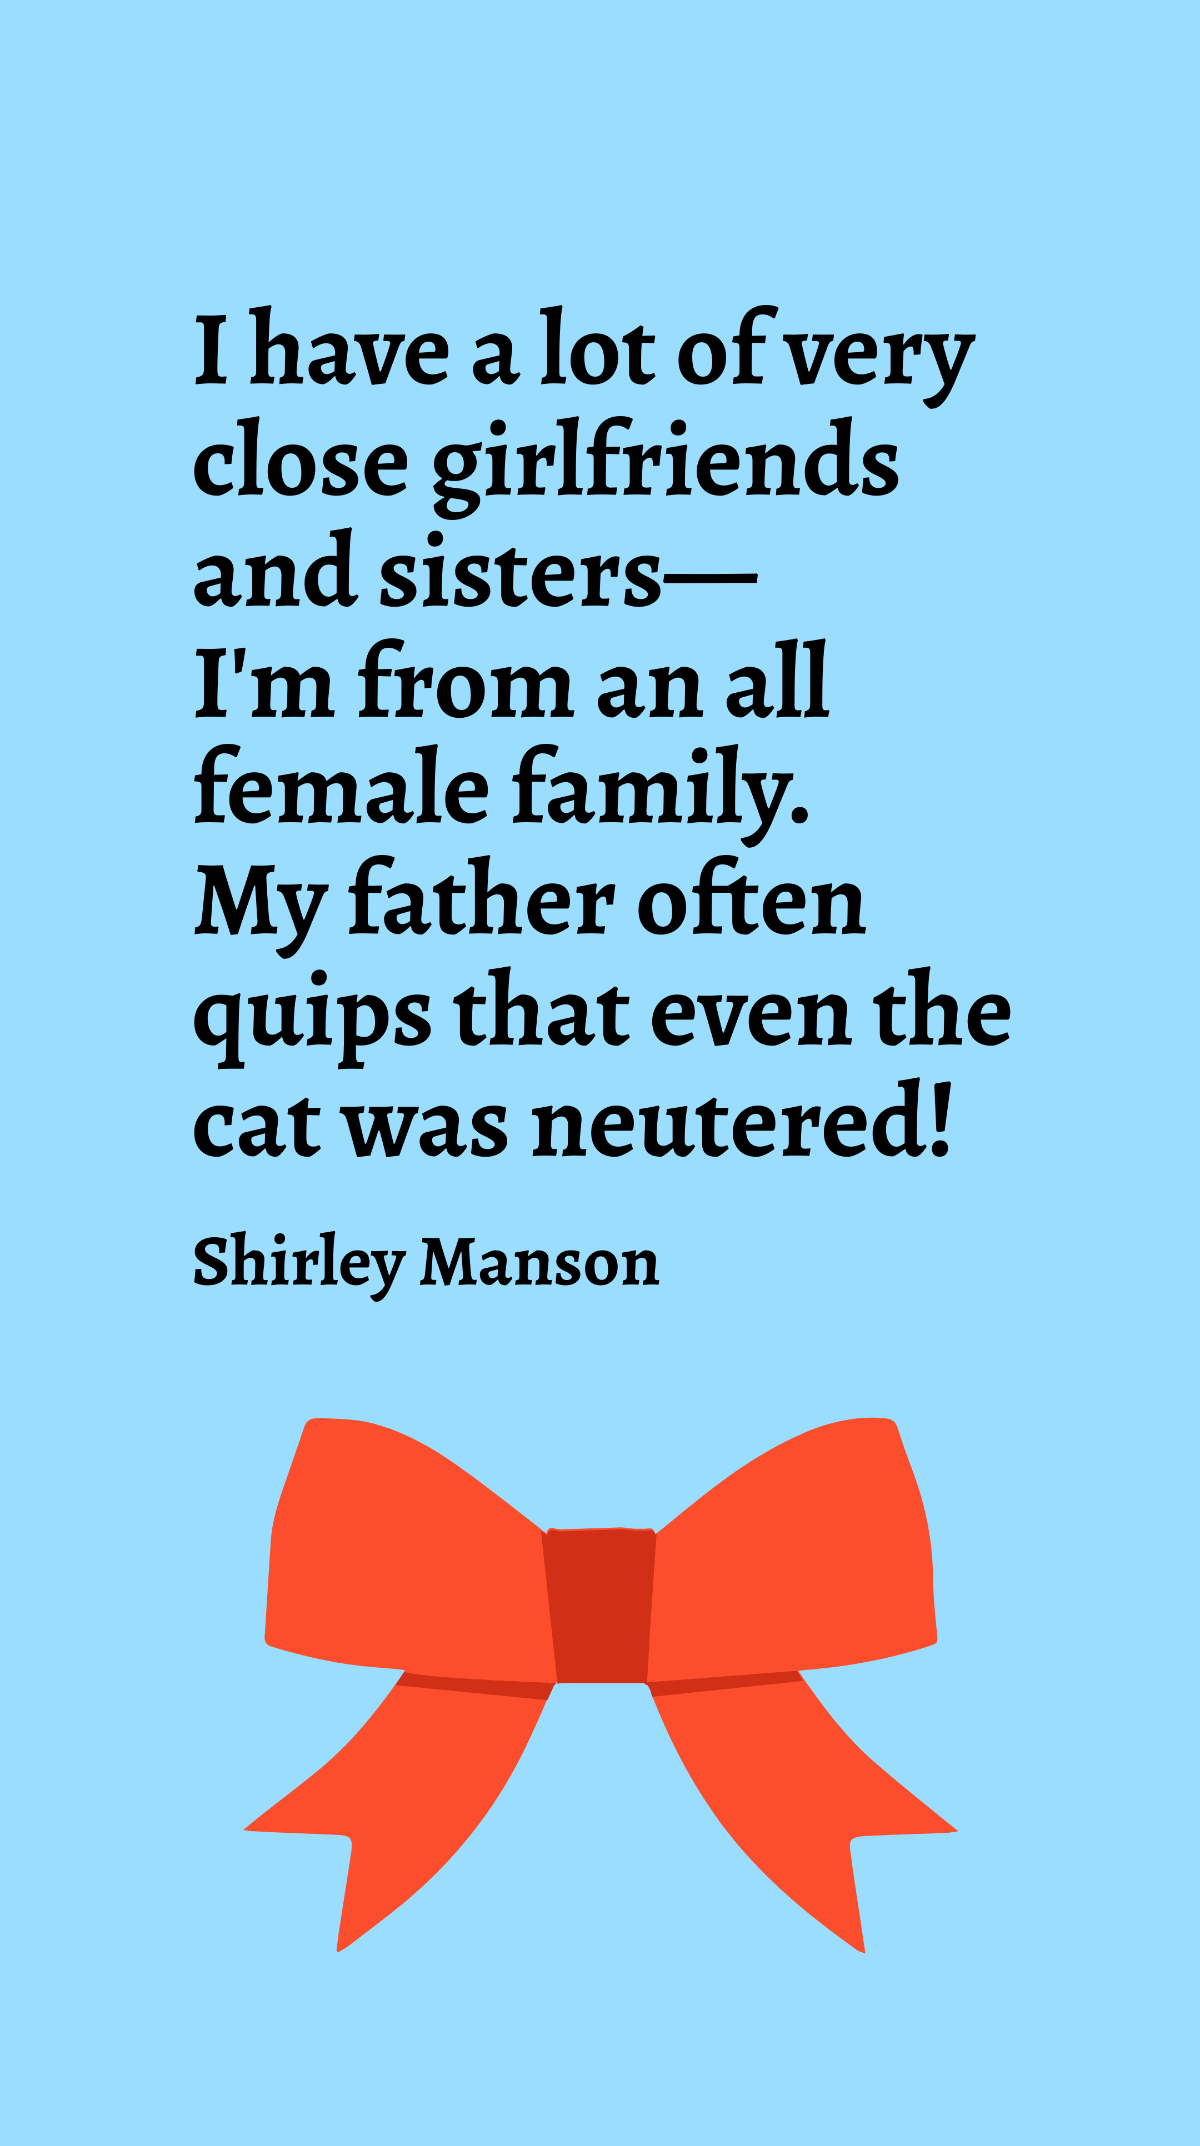 Shirley Manson - I have a lot of very close girlfriends and sisters - I'm from an all female family. My father often quips that even the cat was neutered! Template